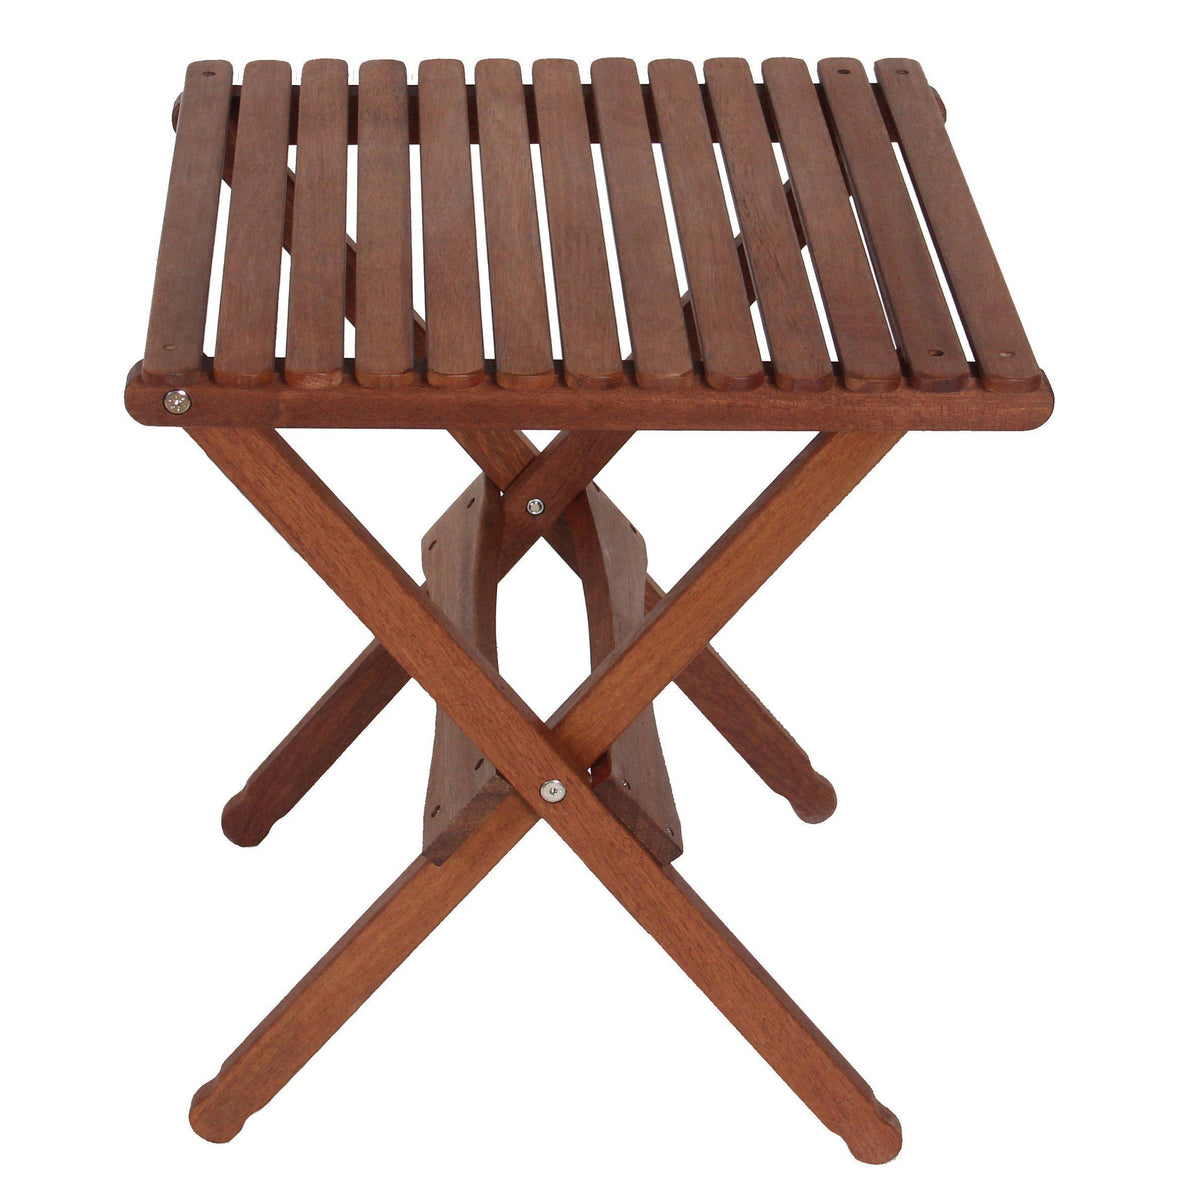 Pangean Folding Table - Large, from Byer of Maine